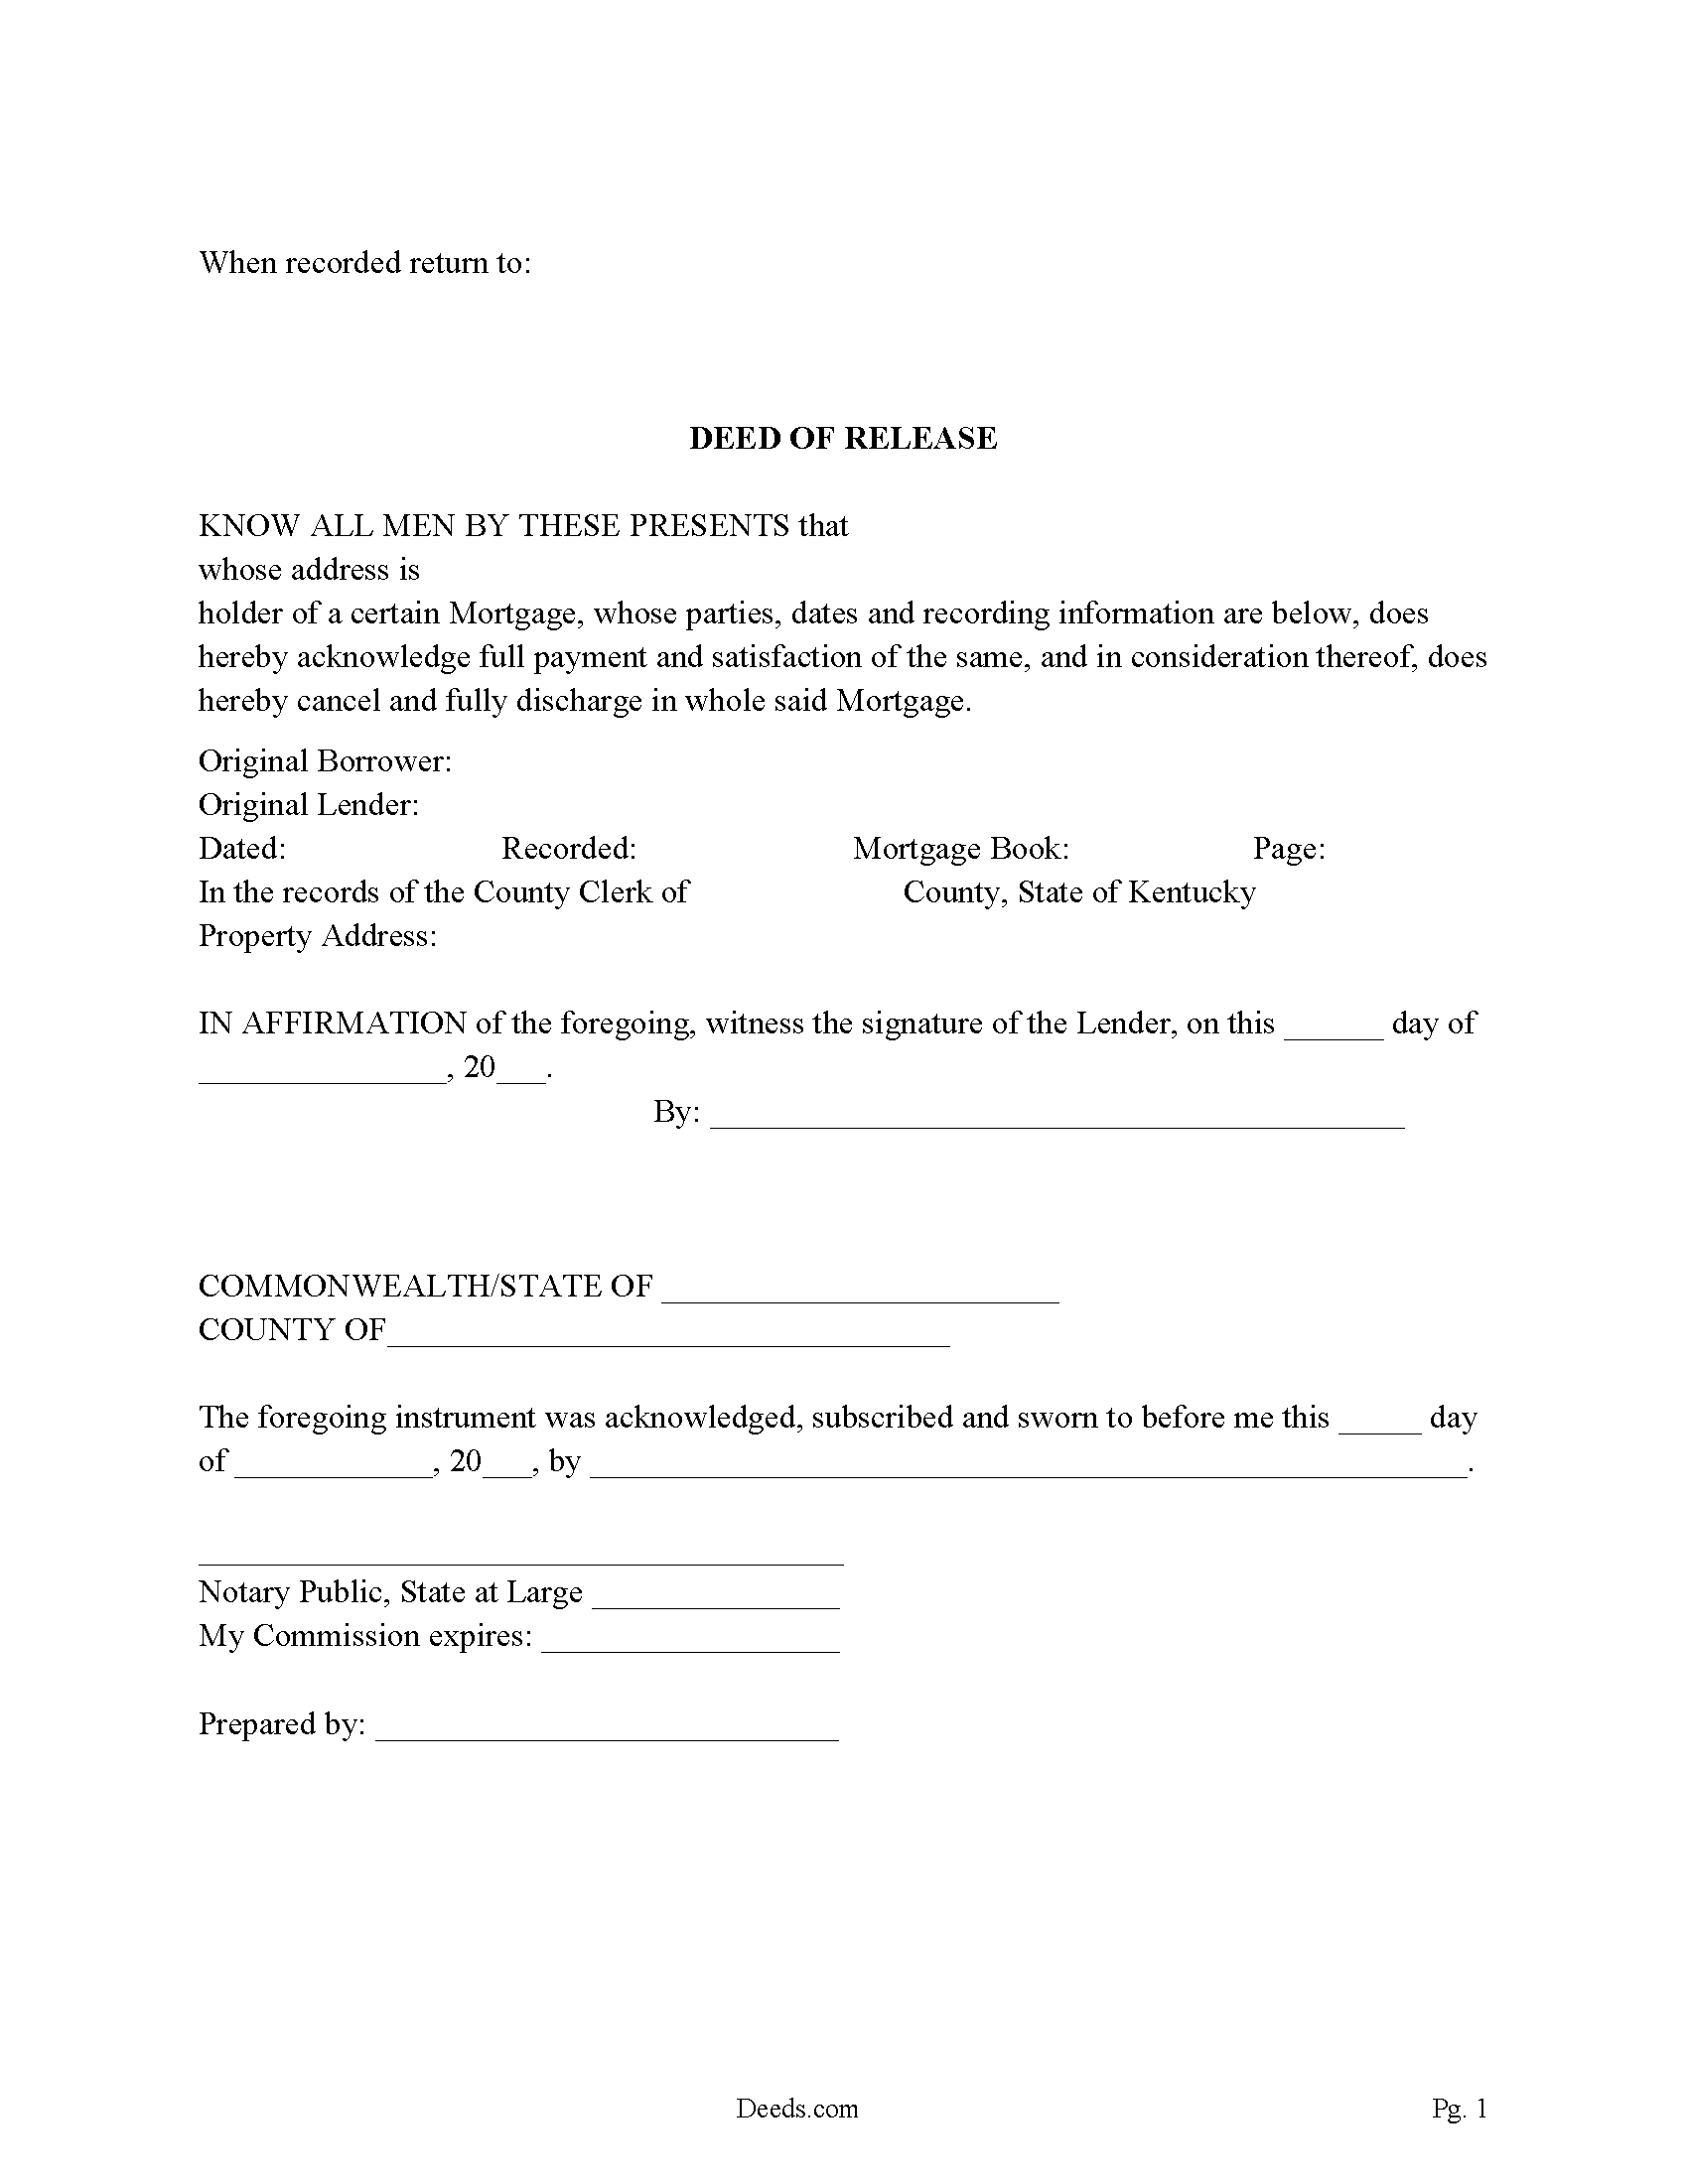 Deed of Release Form